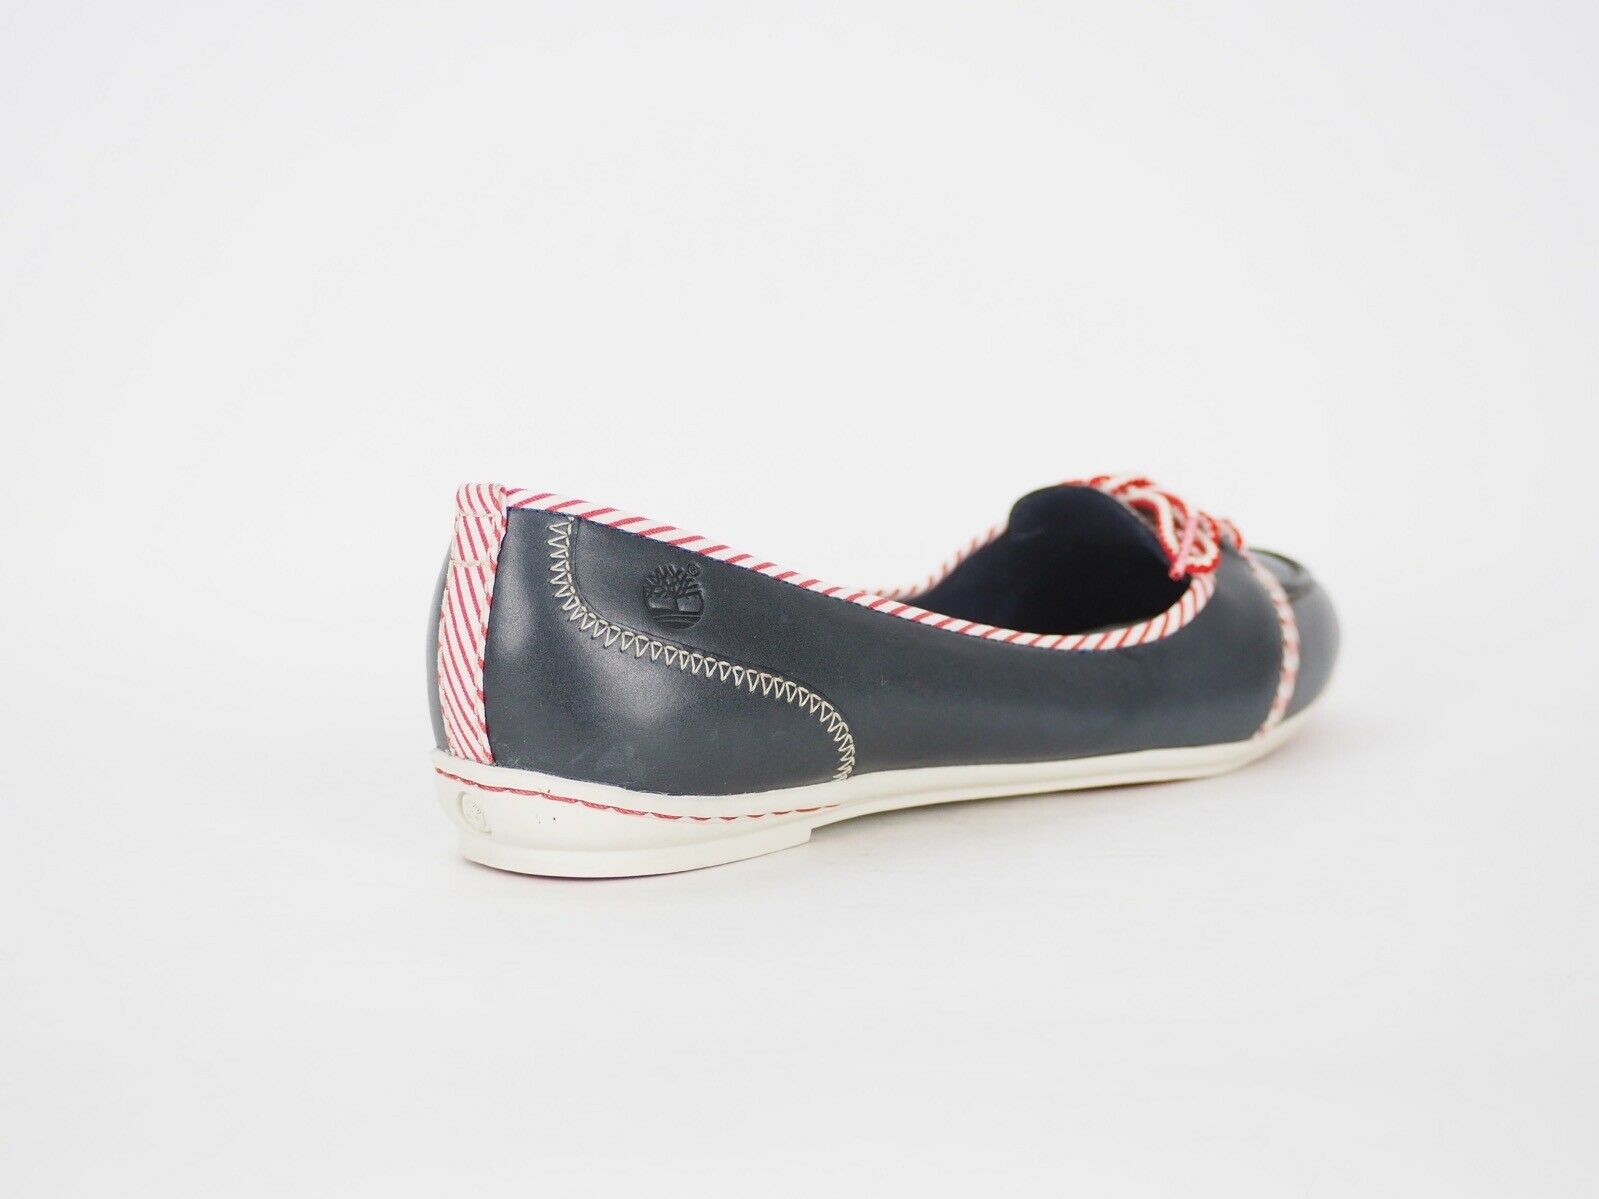 Womens Timberland Belle Island 24647 Navy Blue Leather Casual Ballerina Flats - London Top Style